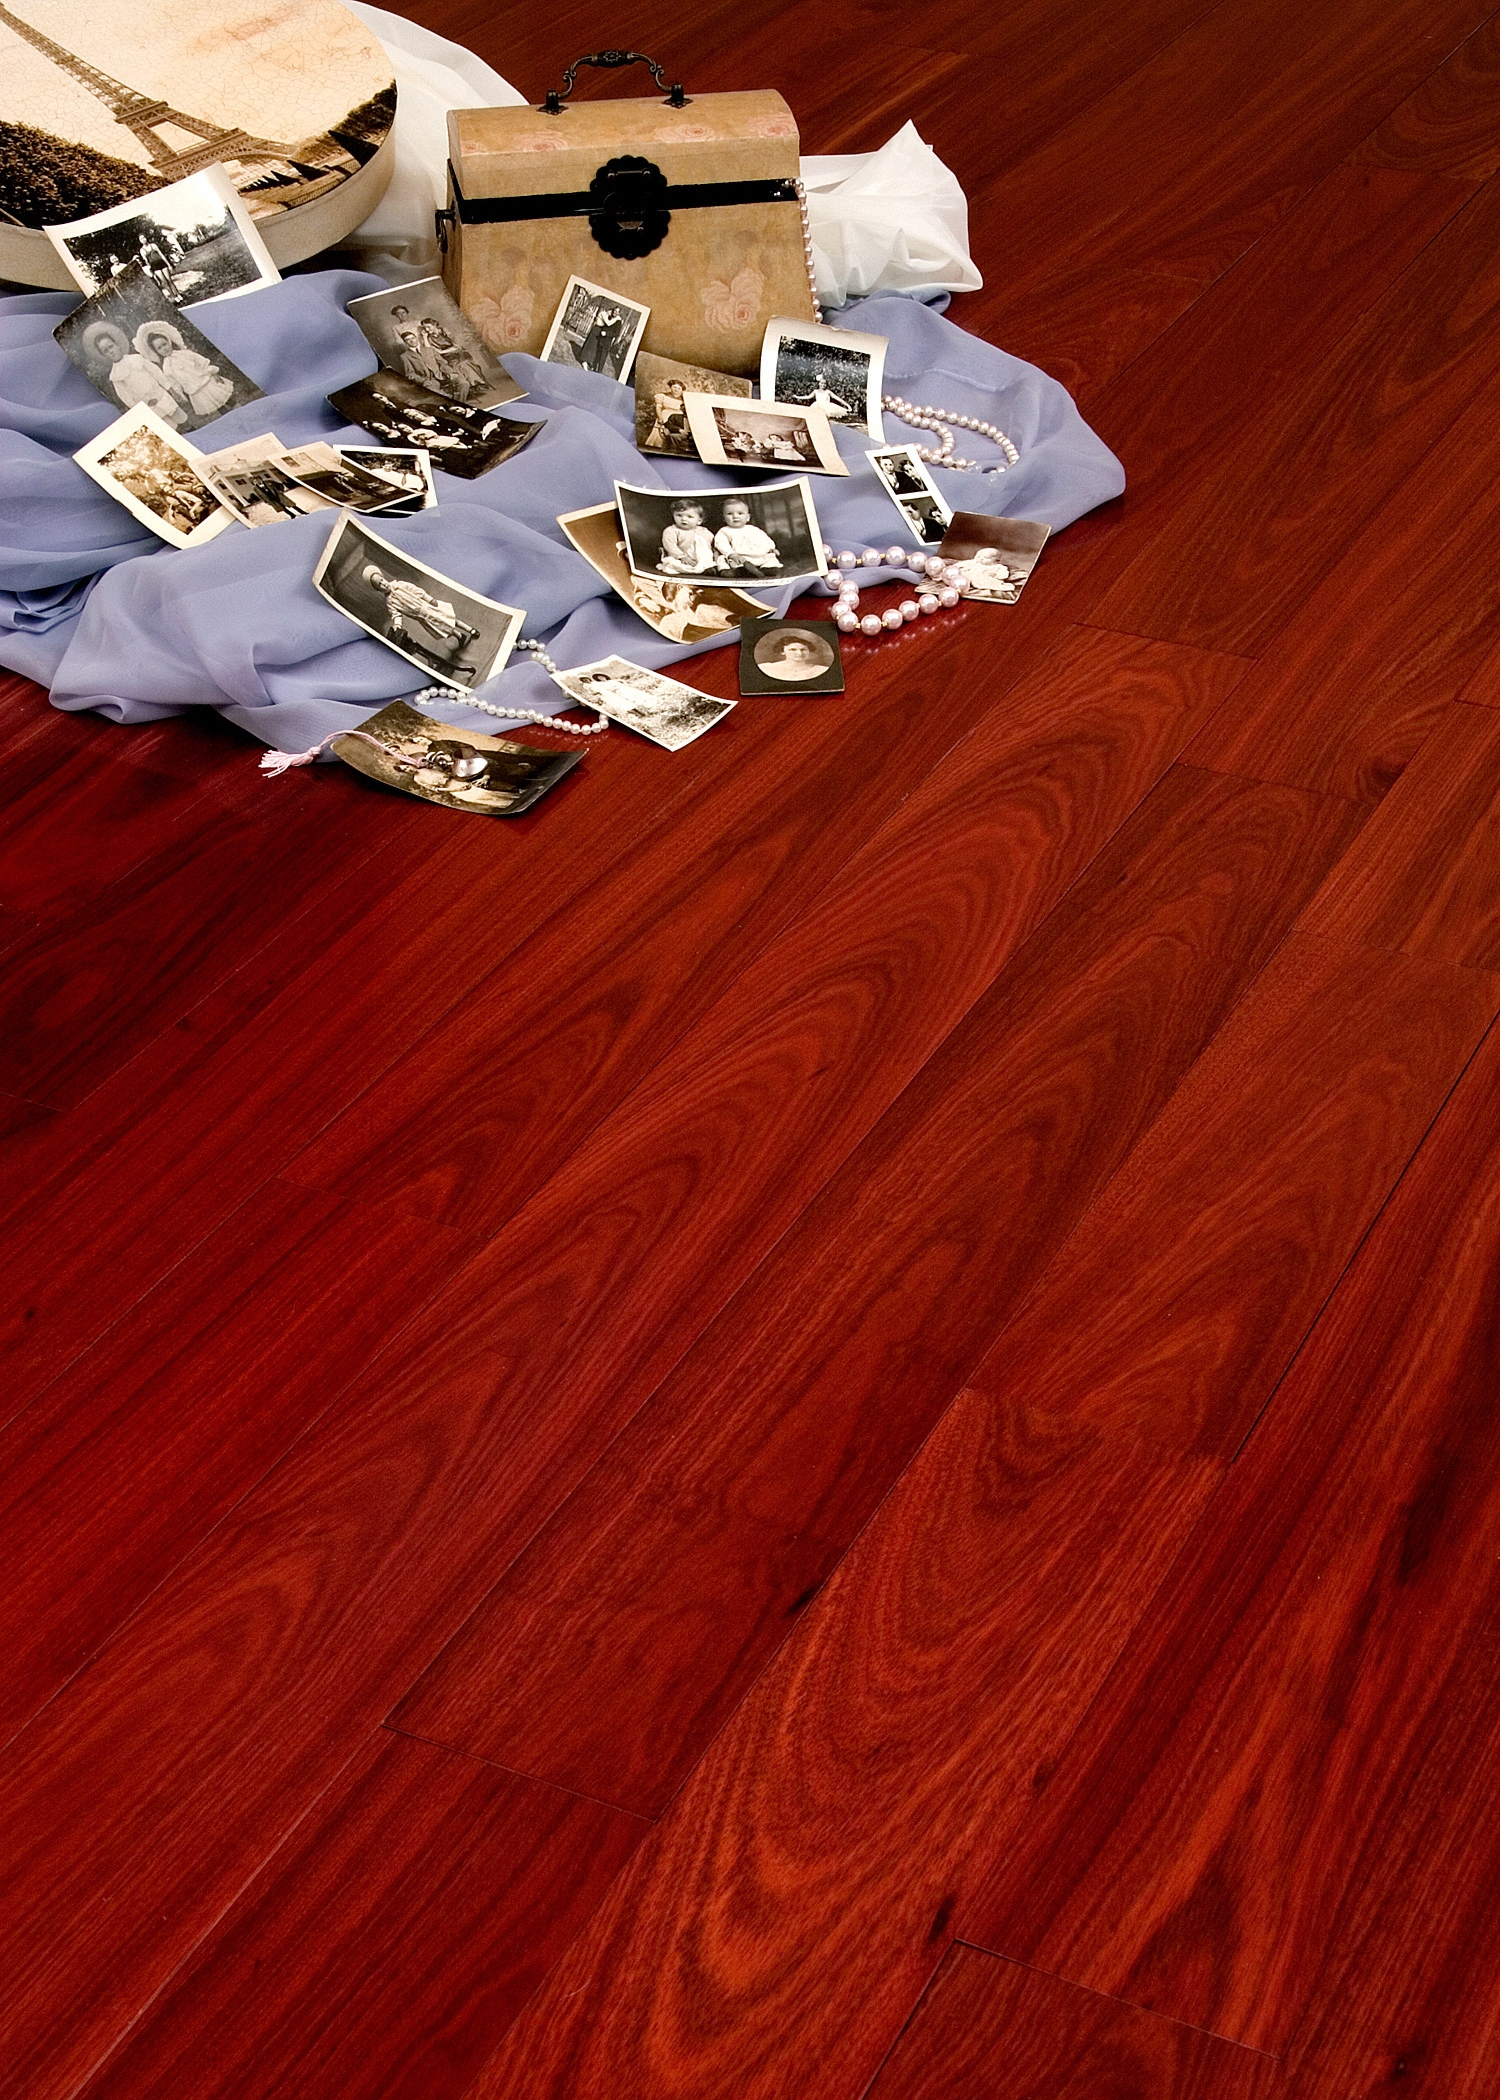 Bellawood 3 4 In Select Bloodwood Solid Hardwood Flooring 5 Wide Ll